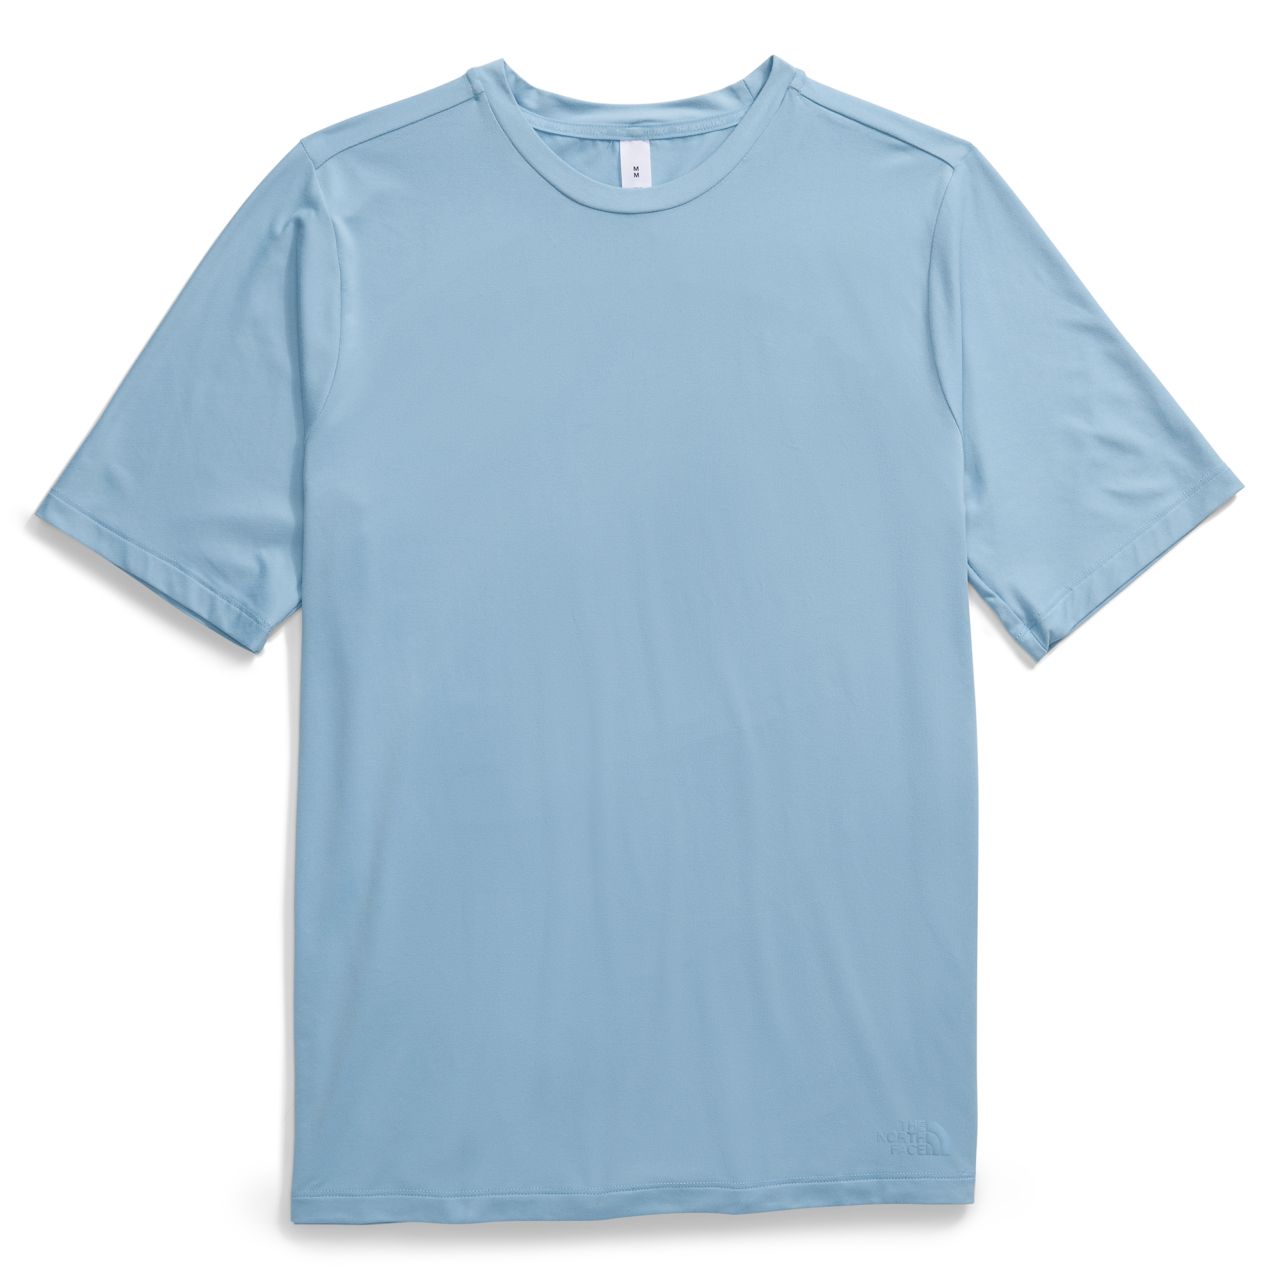 The North Face Flashdry mint green active shirt